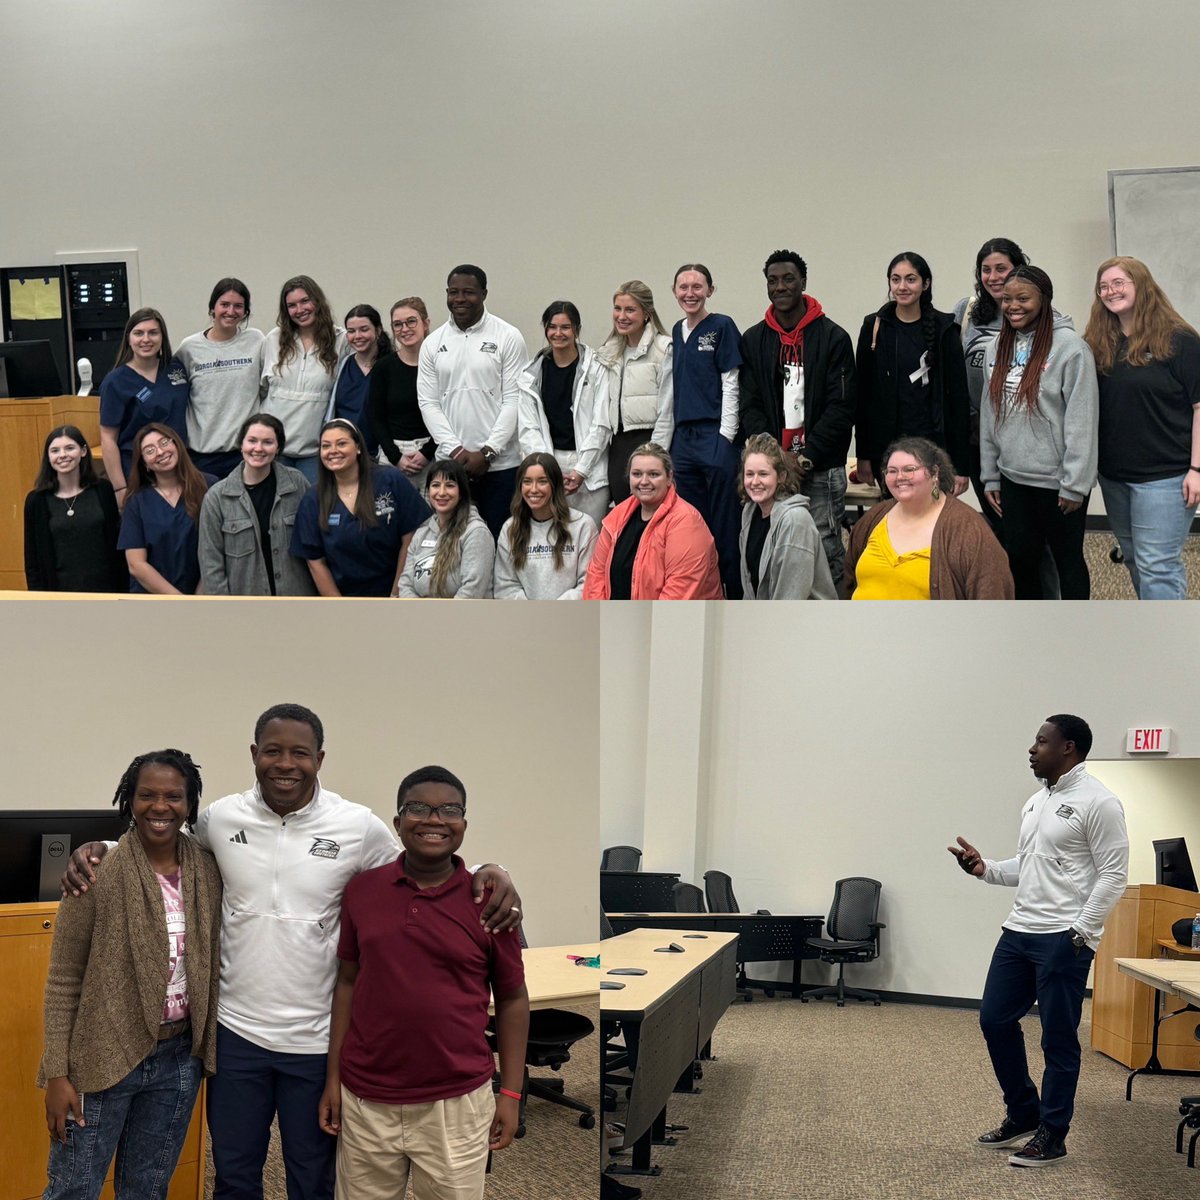 Had a Great time Speaking to the Communication Sciences and Disorders program students and their clients today! #ajsoars #prayperformpersist #dontdismyabilities